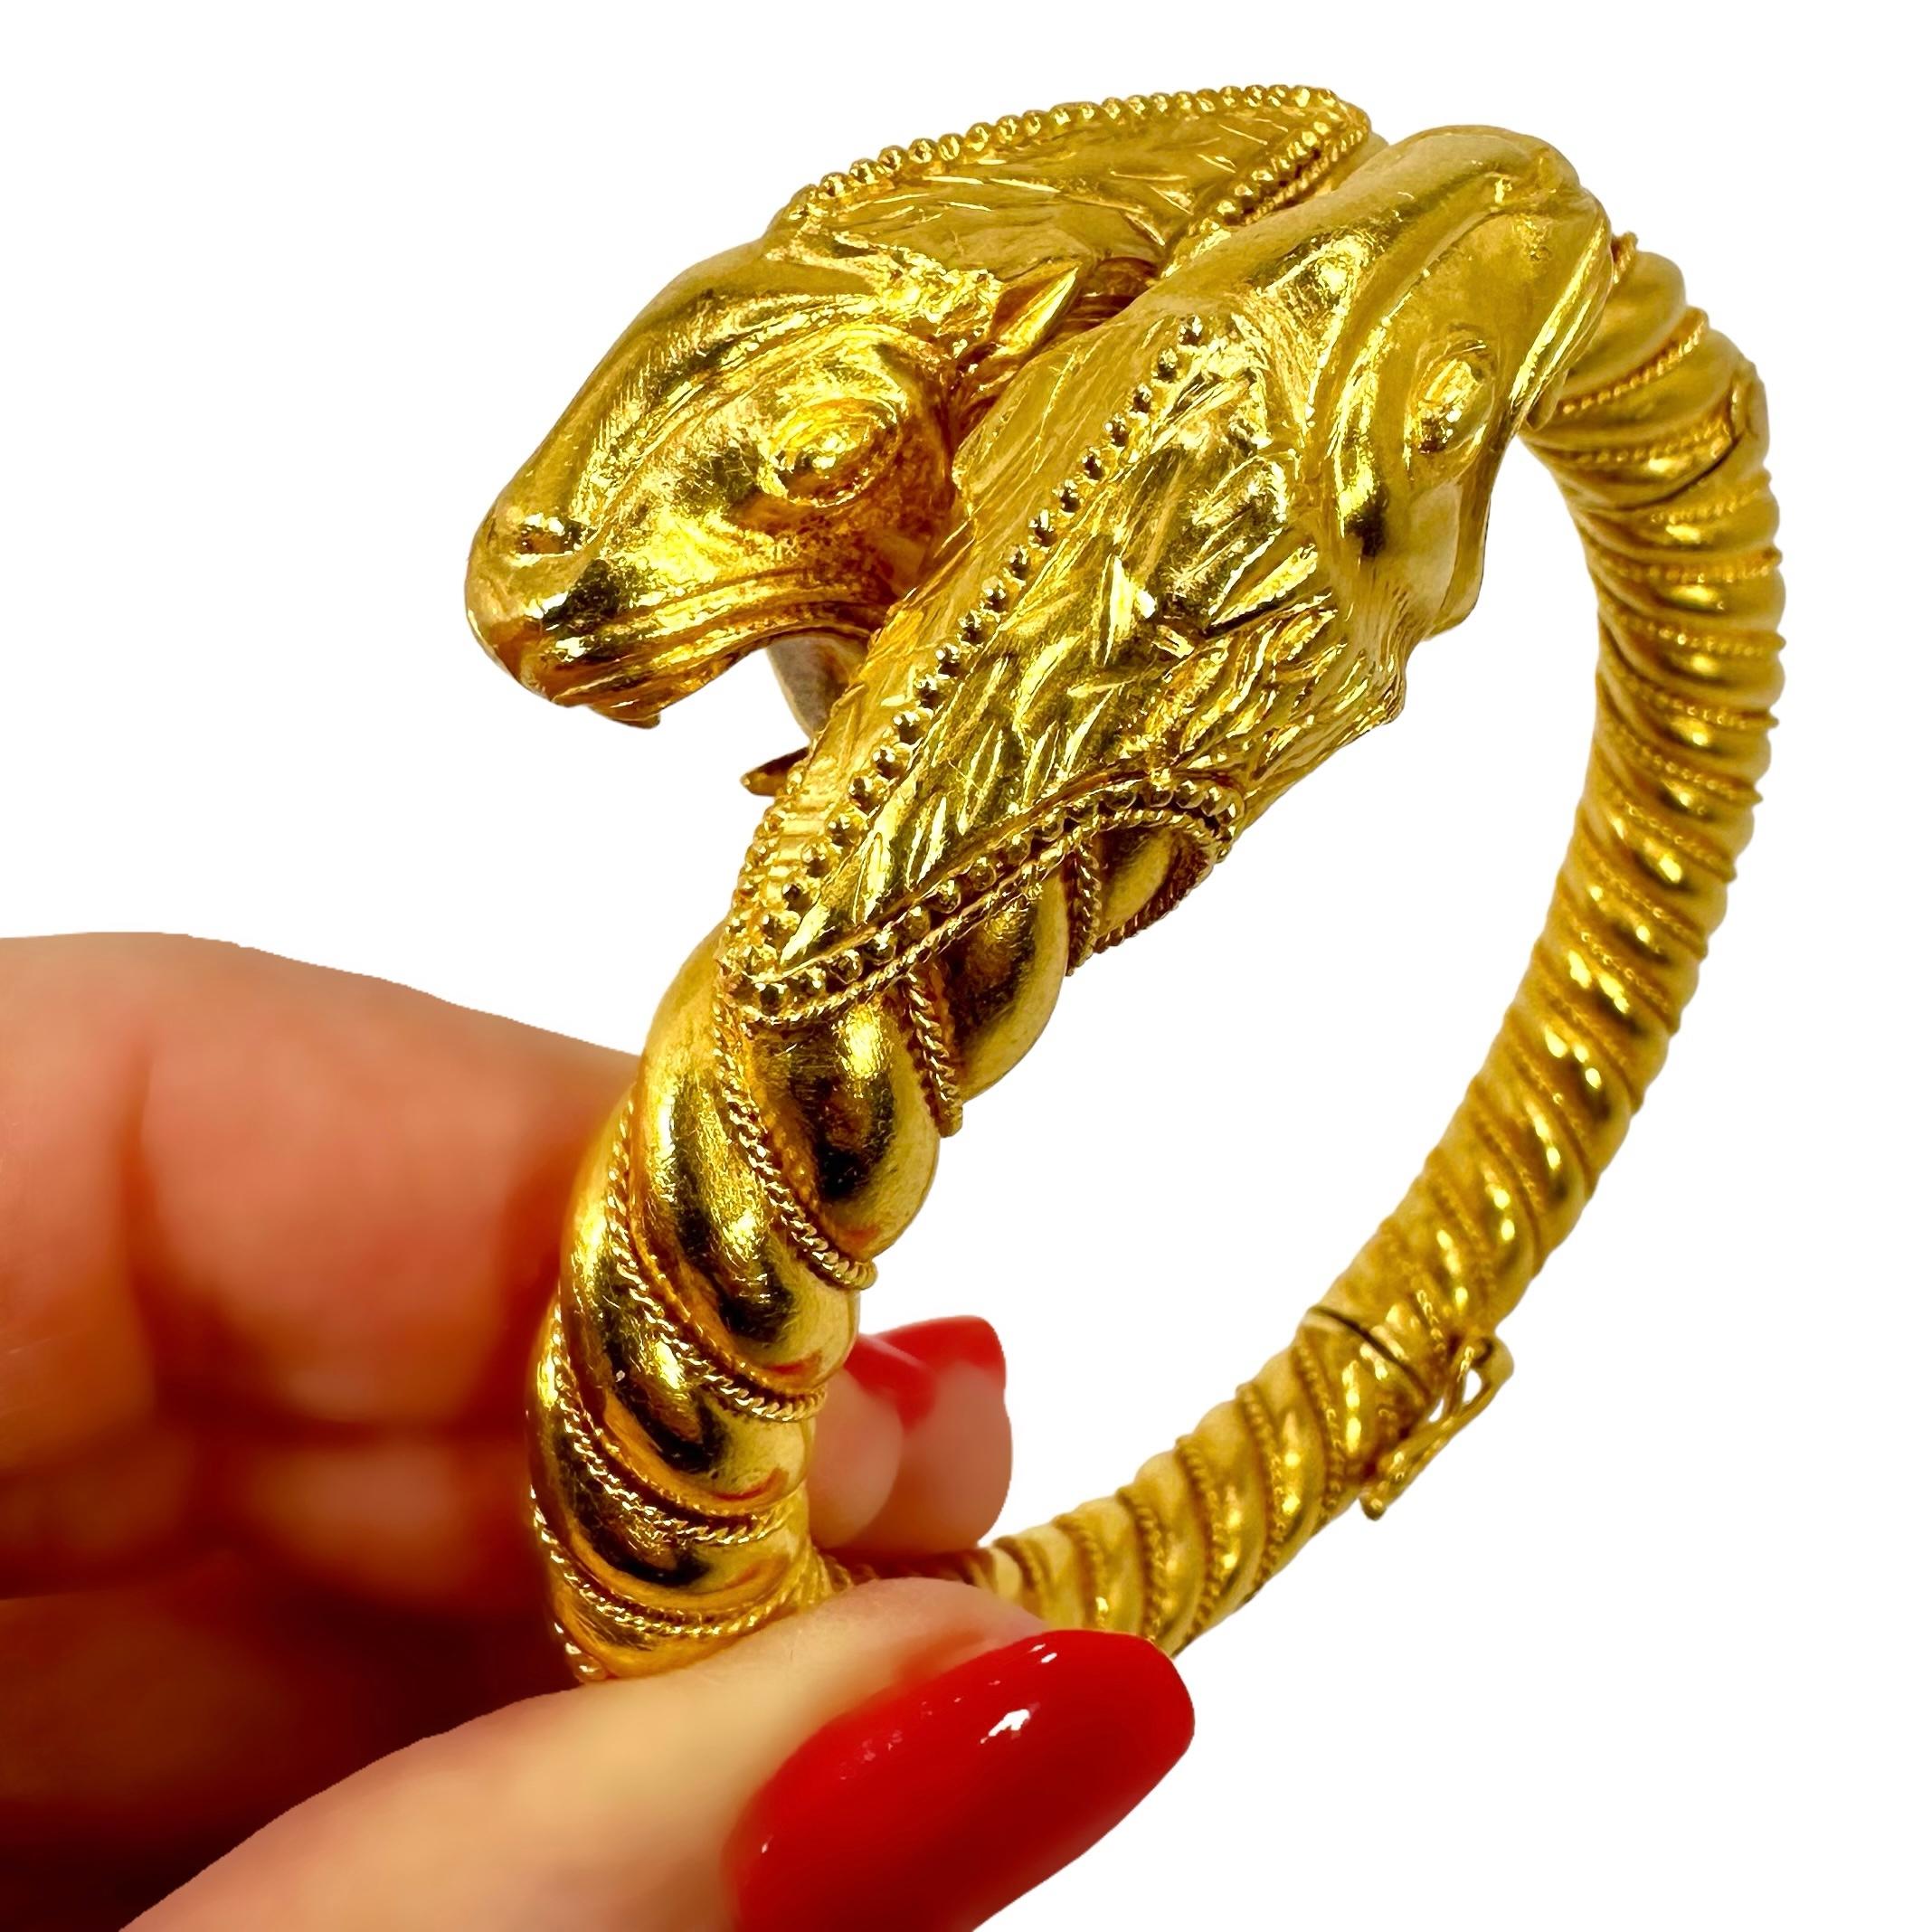 Double Headed Mythical Creature Bypass Cuff Bracelet in 22K Gold by Lalaounis  For Sale 11